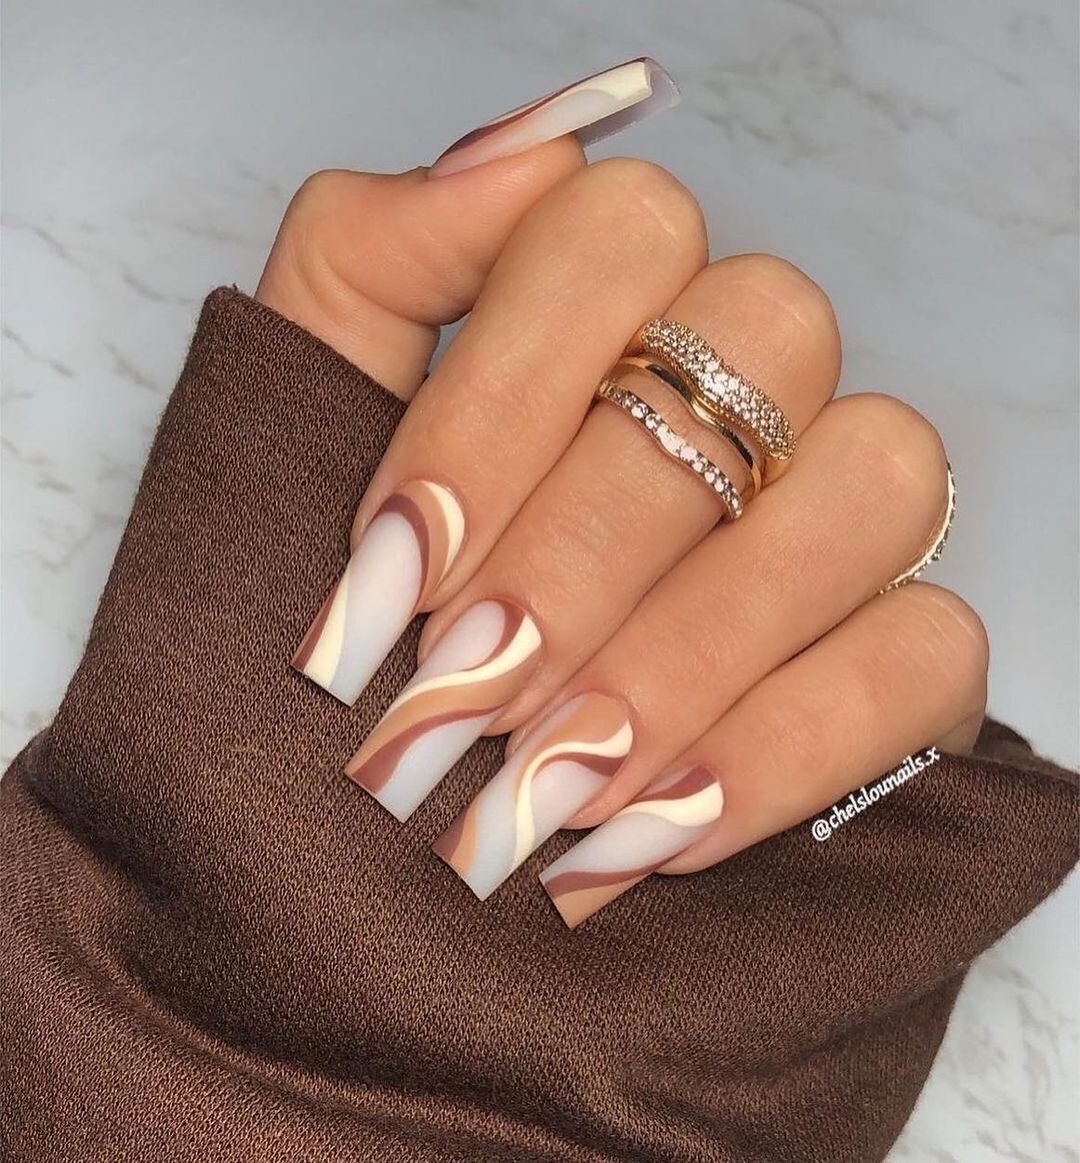 Tan and White Nails